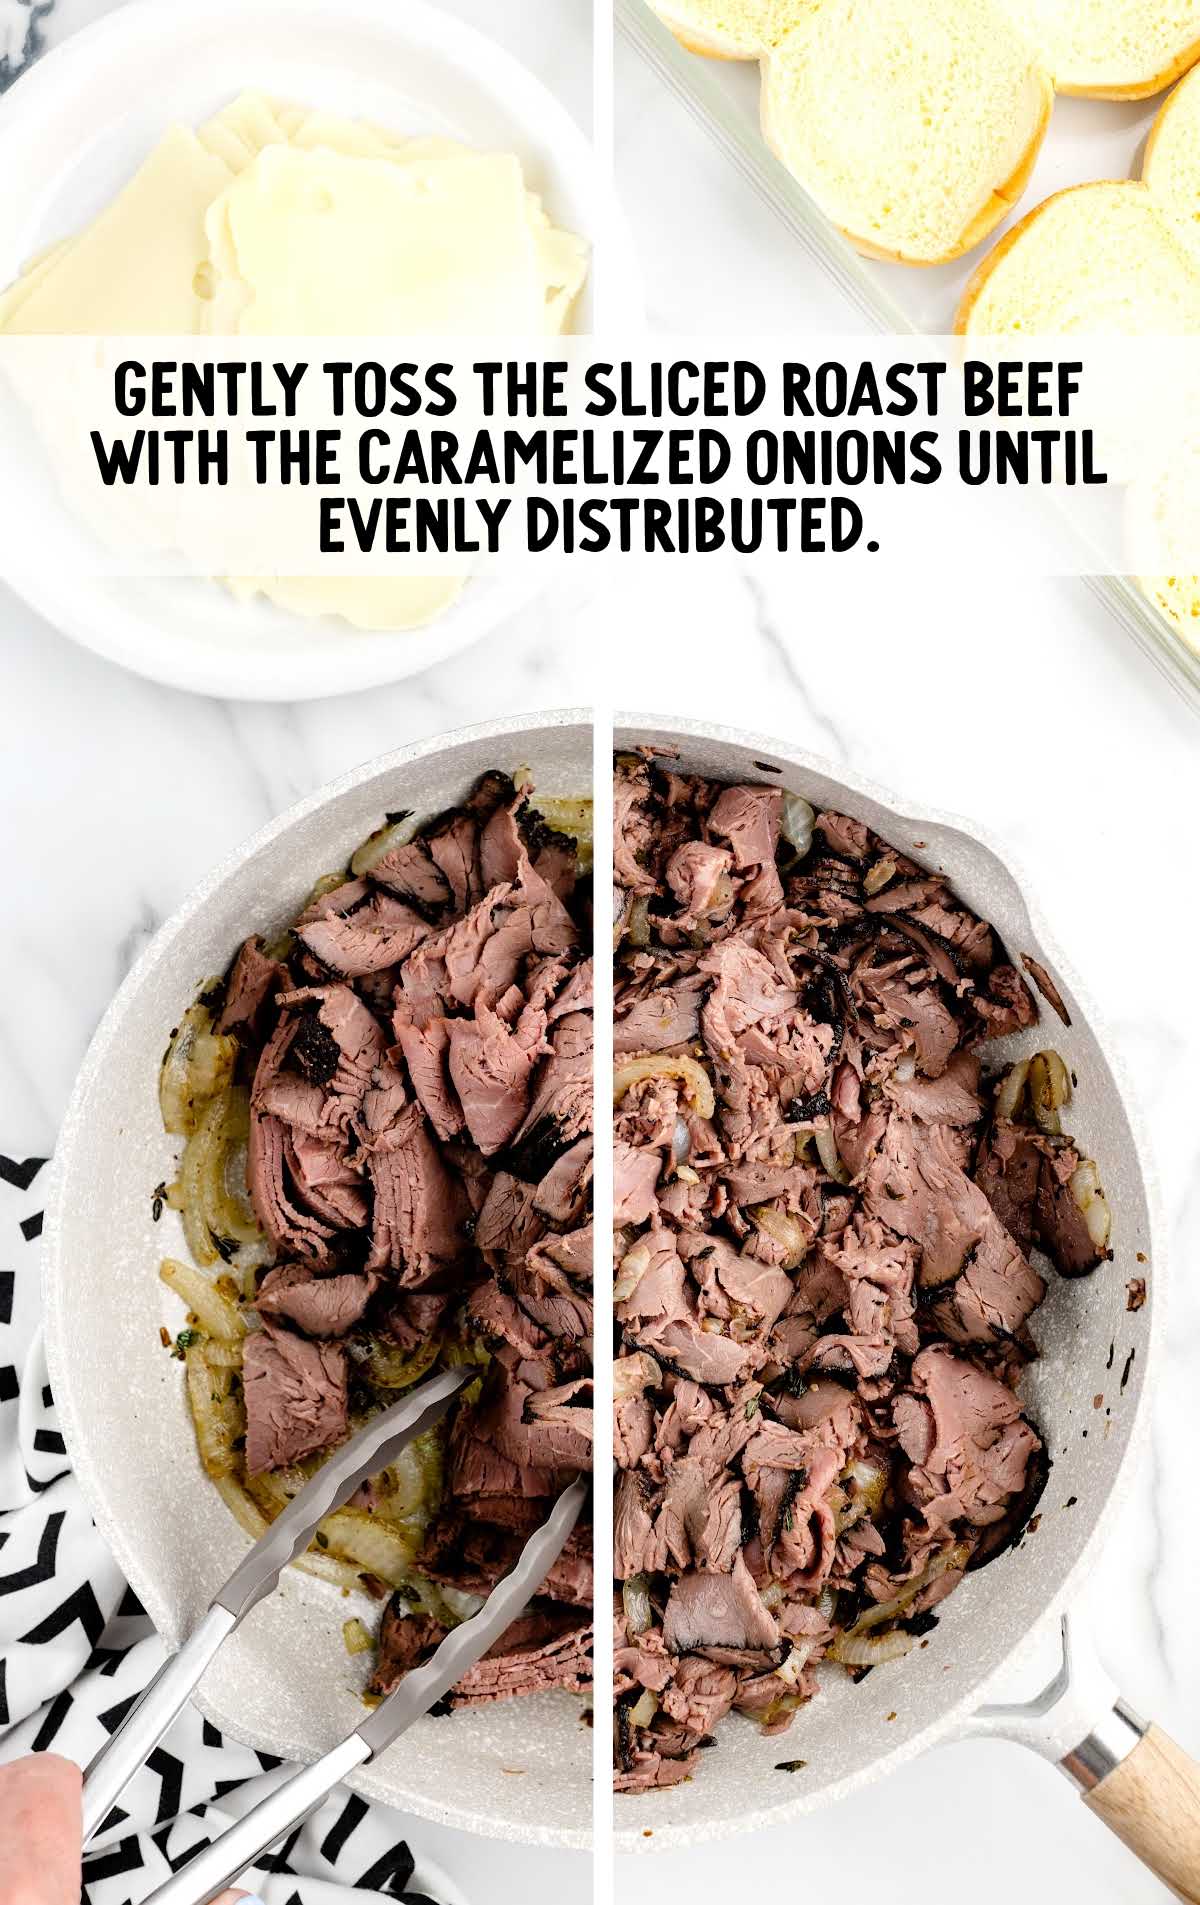 sliced roast beef and caramelized onions combined in a skillet